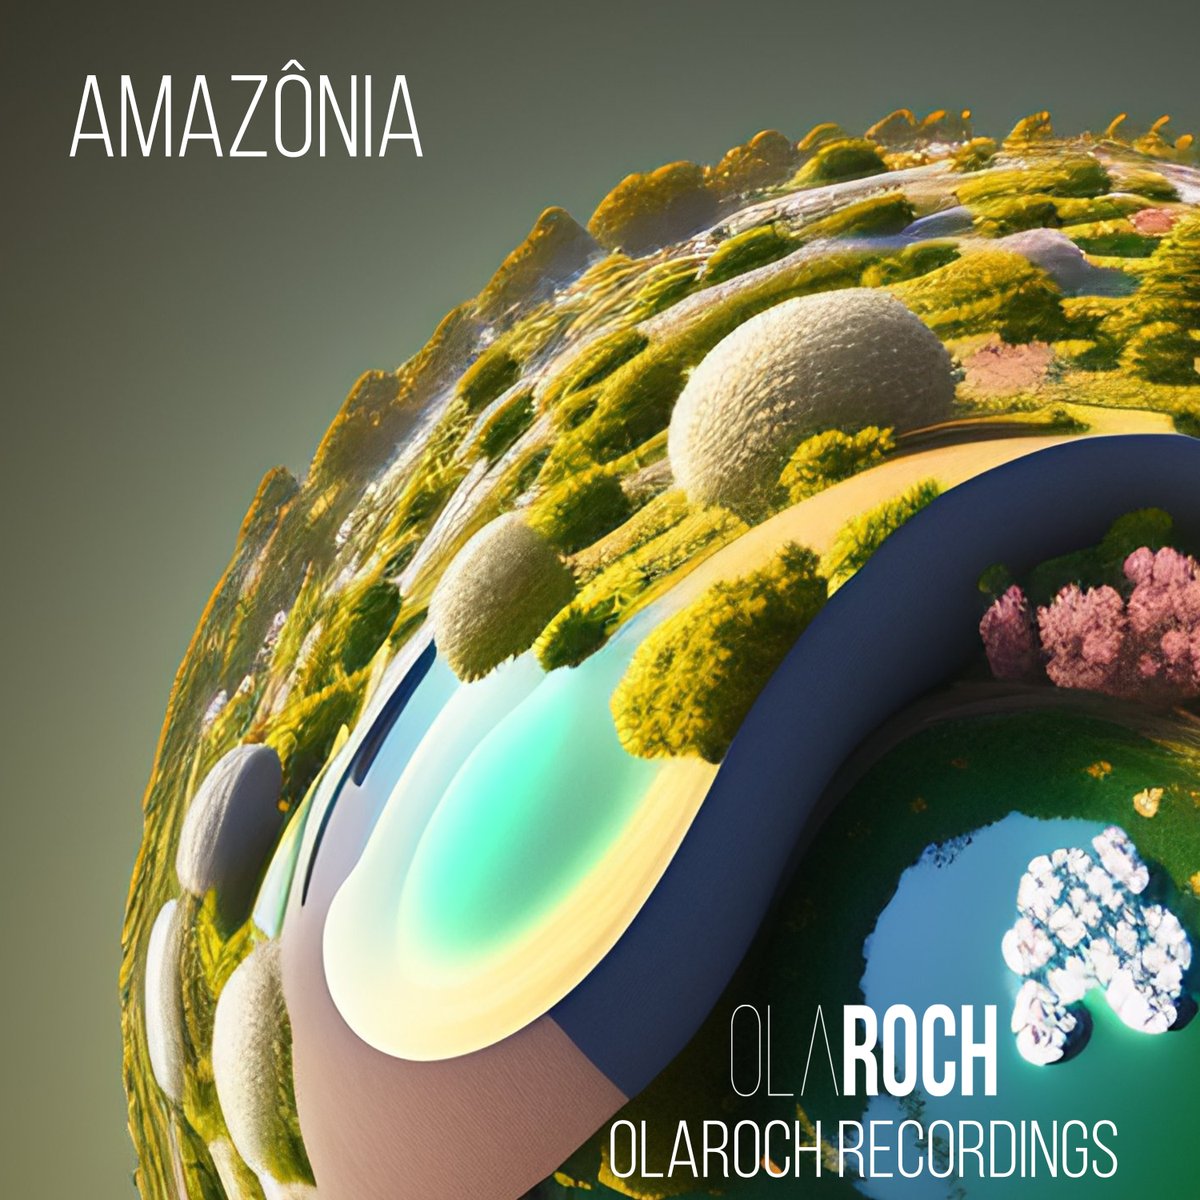 Here we go | with @olarochmusic @olarochrecordings @beatport

We are ready for the next release as the data will be available for pre-order and pre-release

#olaroch #melodictechno #olarochrecordings #mixandmaster #amazonia #smmastering #techno #technomusic #progressivehouse